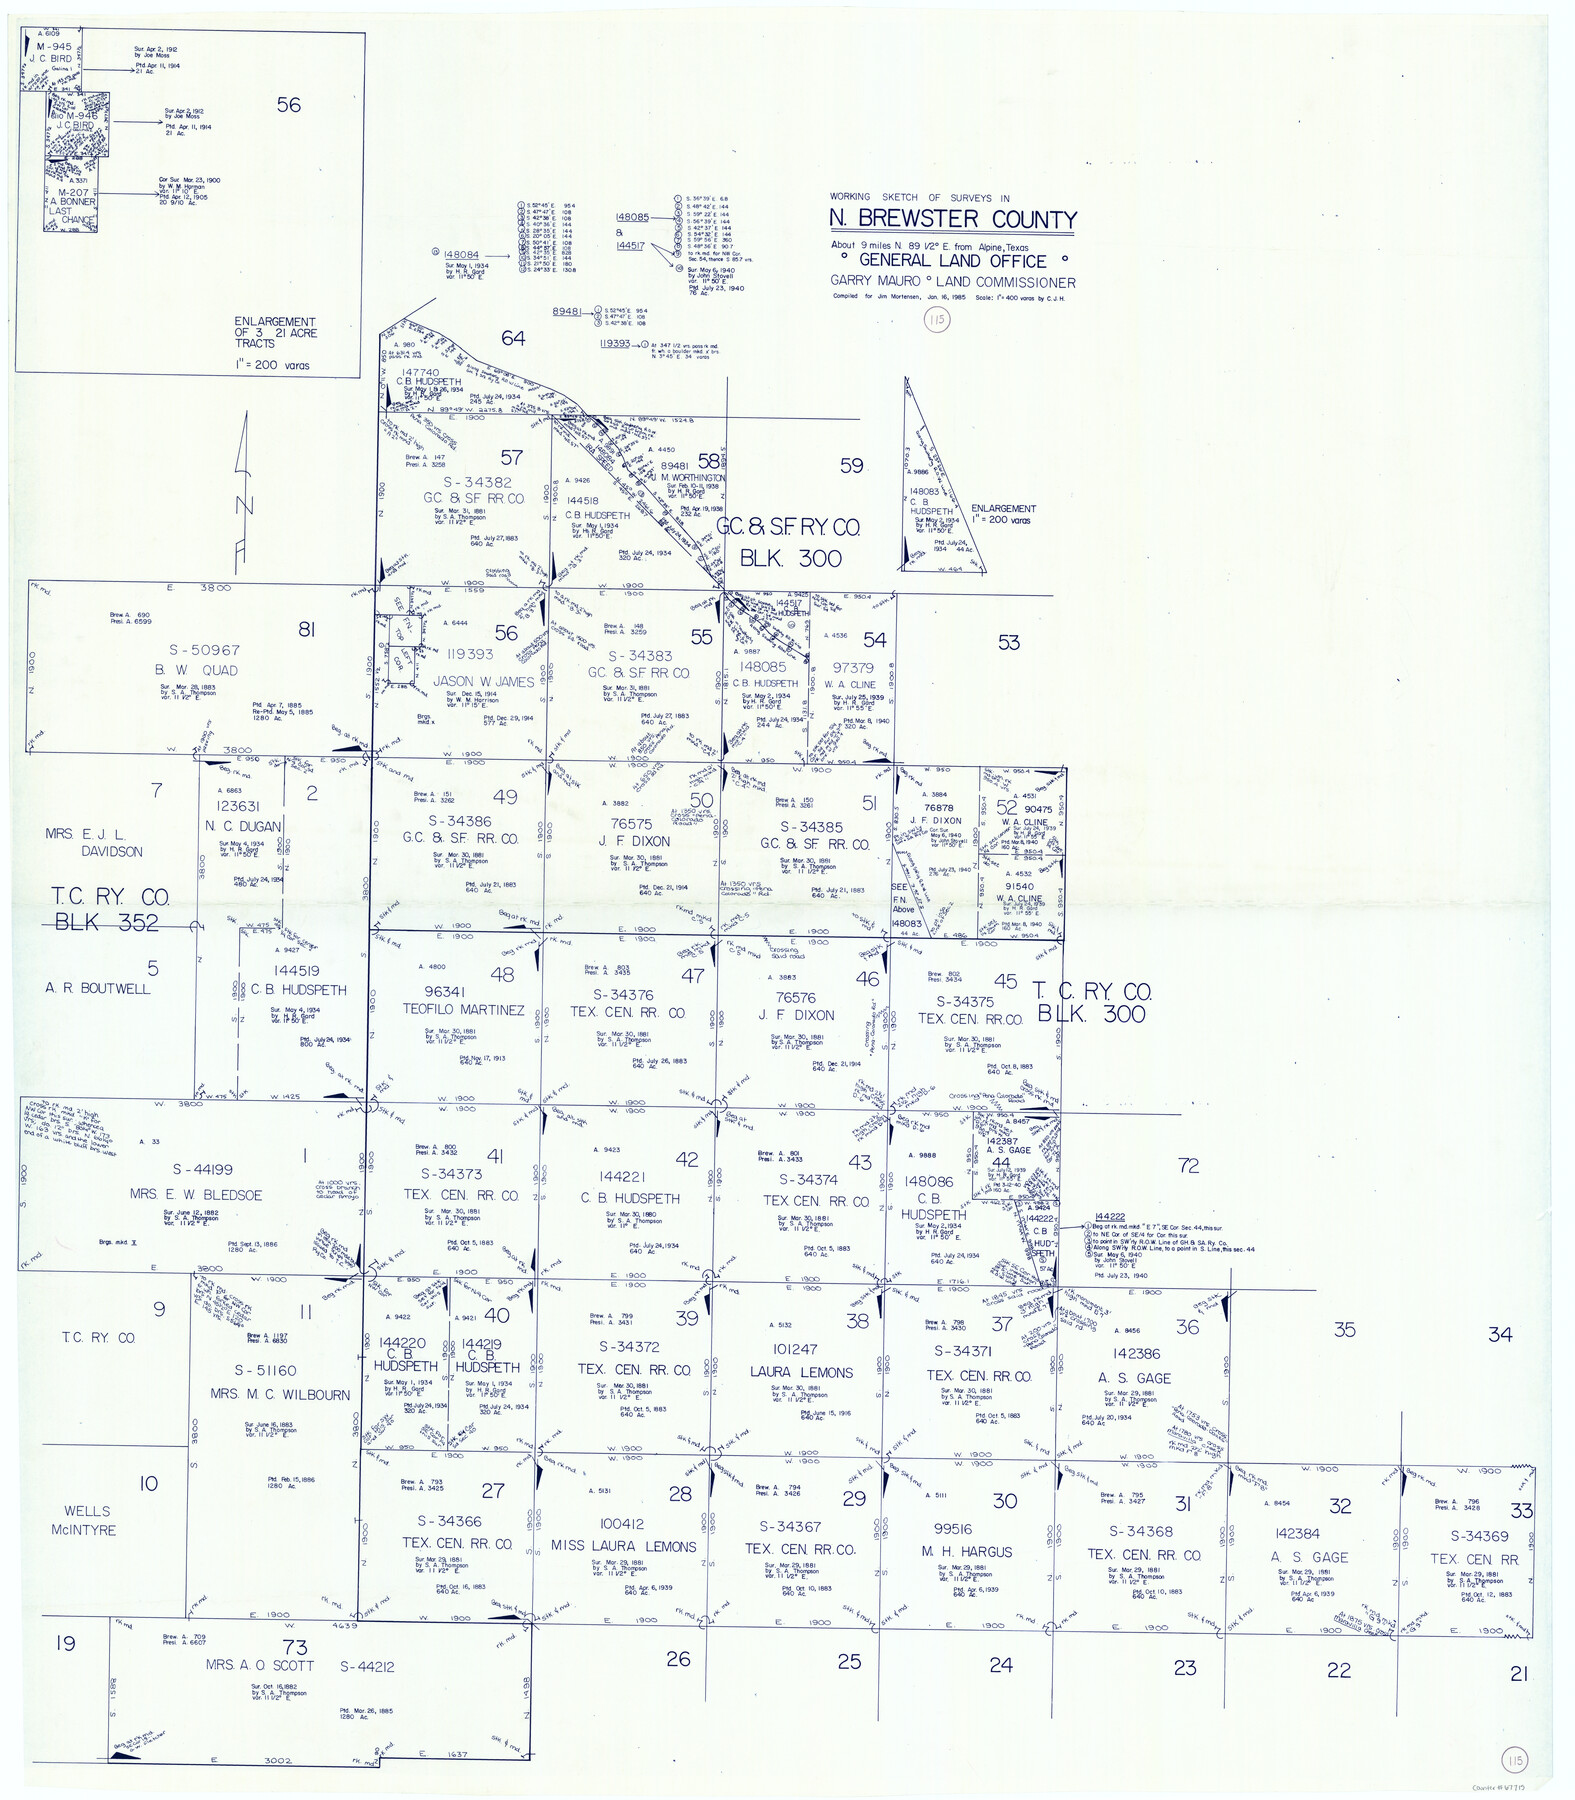 67715, Brewster County Working Sketch 115, General Map Collection